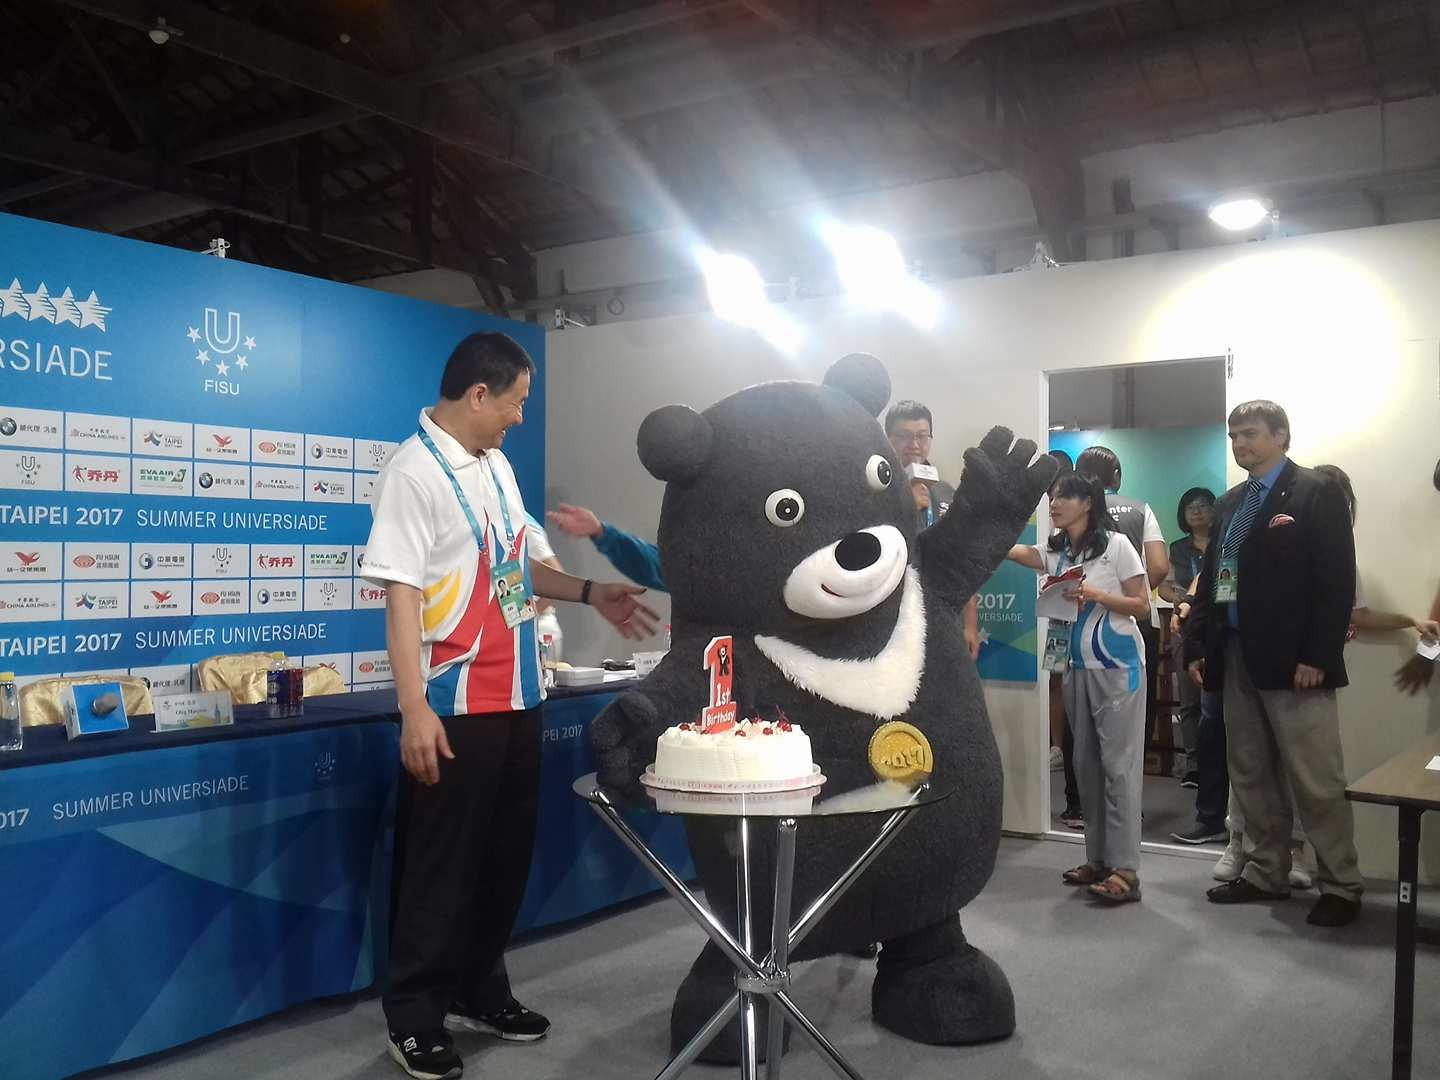 insidethegames is reporting LIVE from the Summer Universiade in Taipei